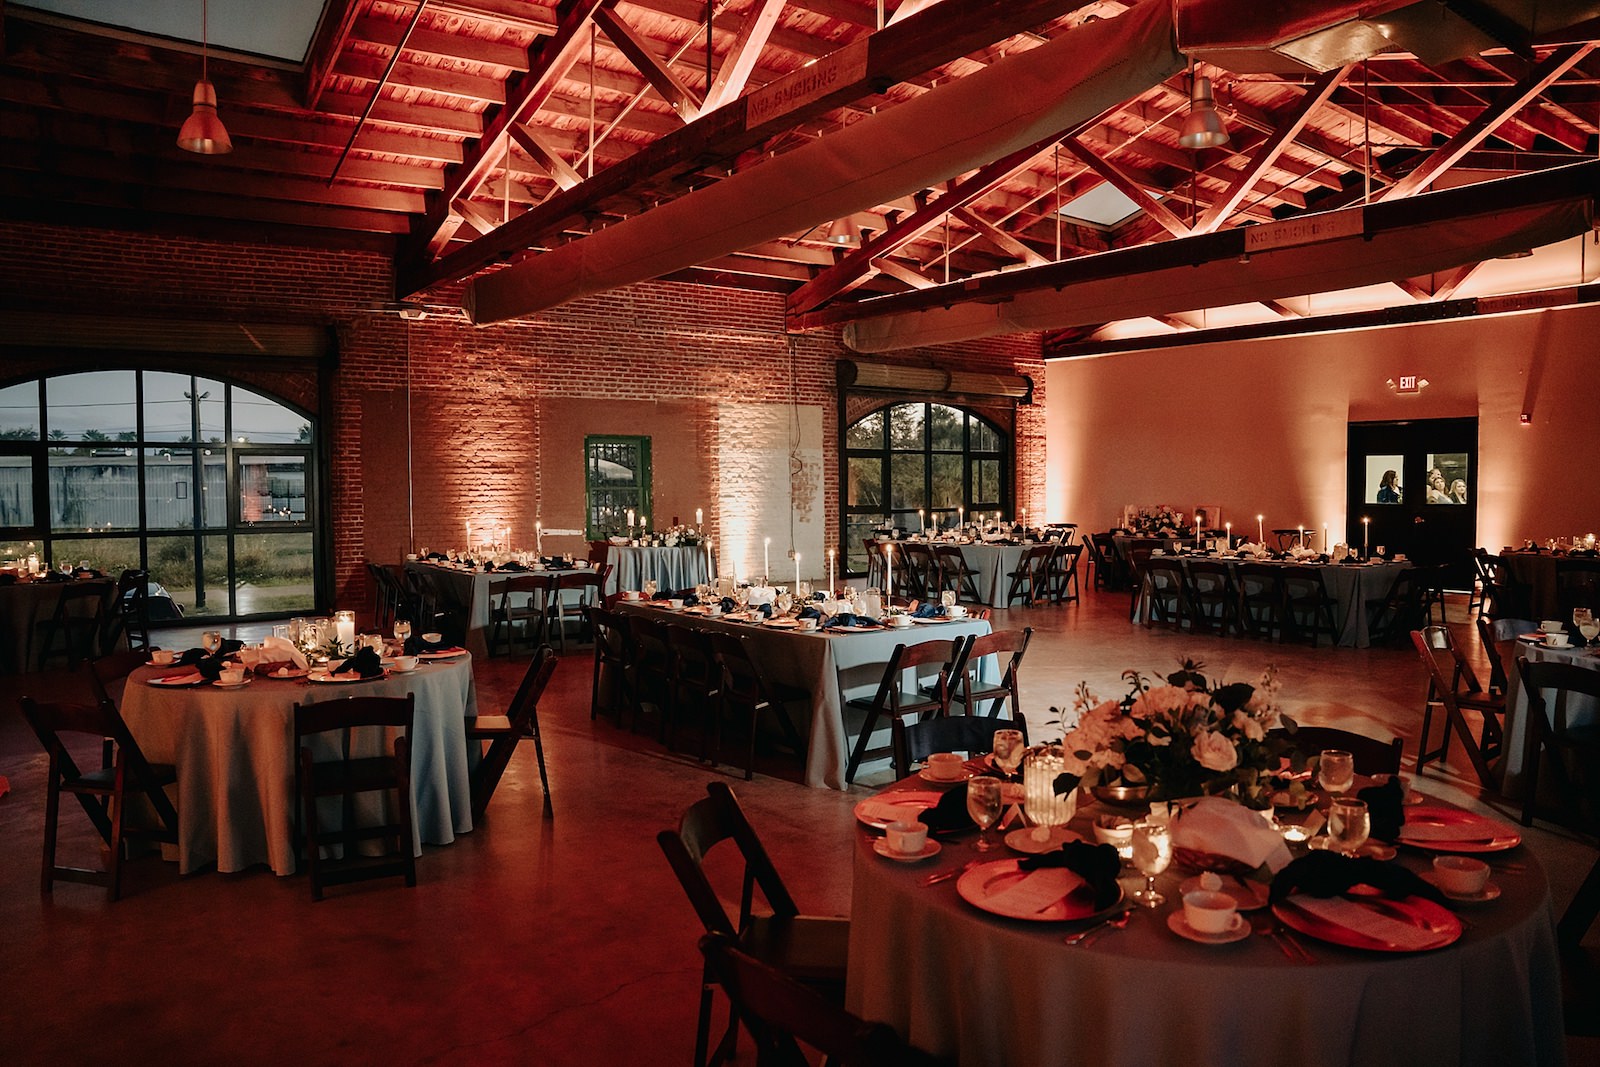 Industrial Indoor Wedding Reception Blue Linens and Wooden Chairs | Draping by Florida Gabro Event Rental Services